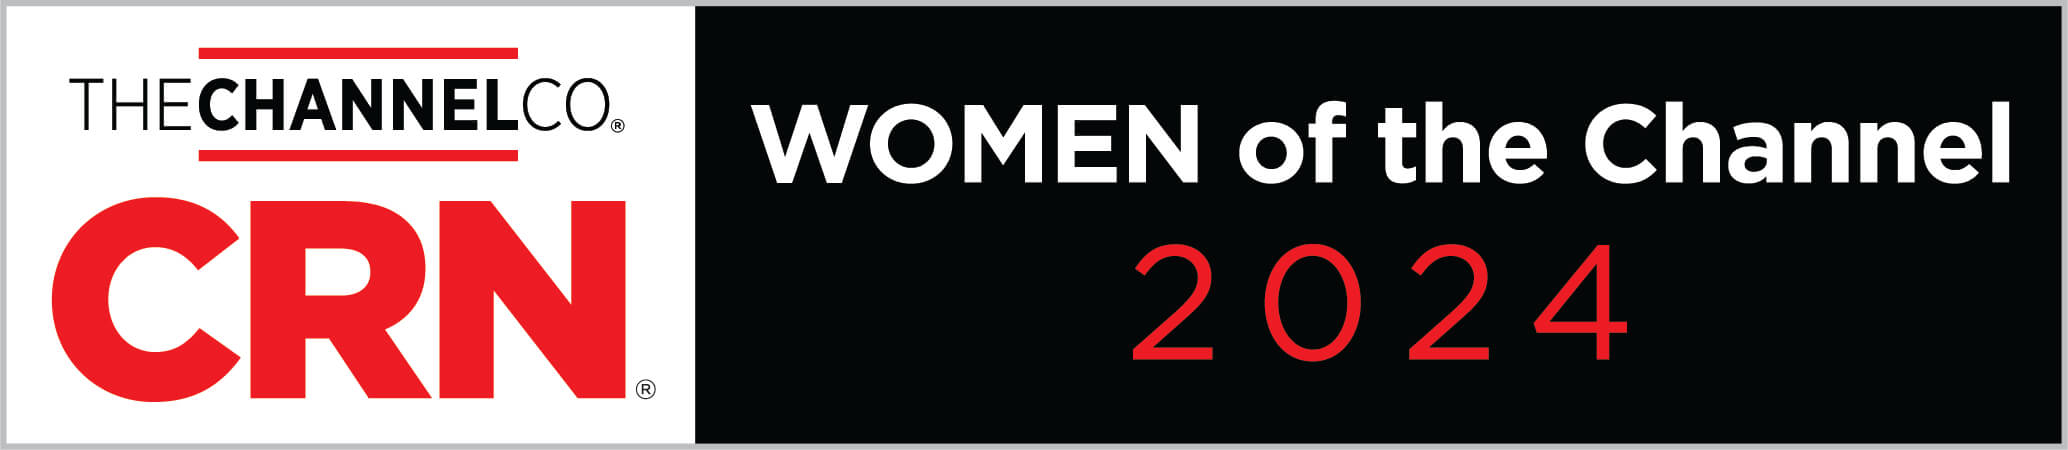 CRN Women of the Channel 2024 Logo